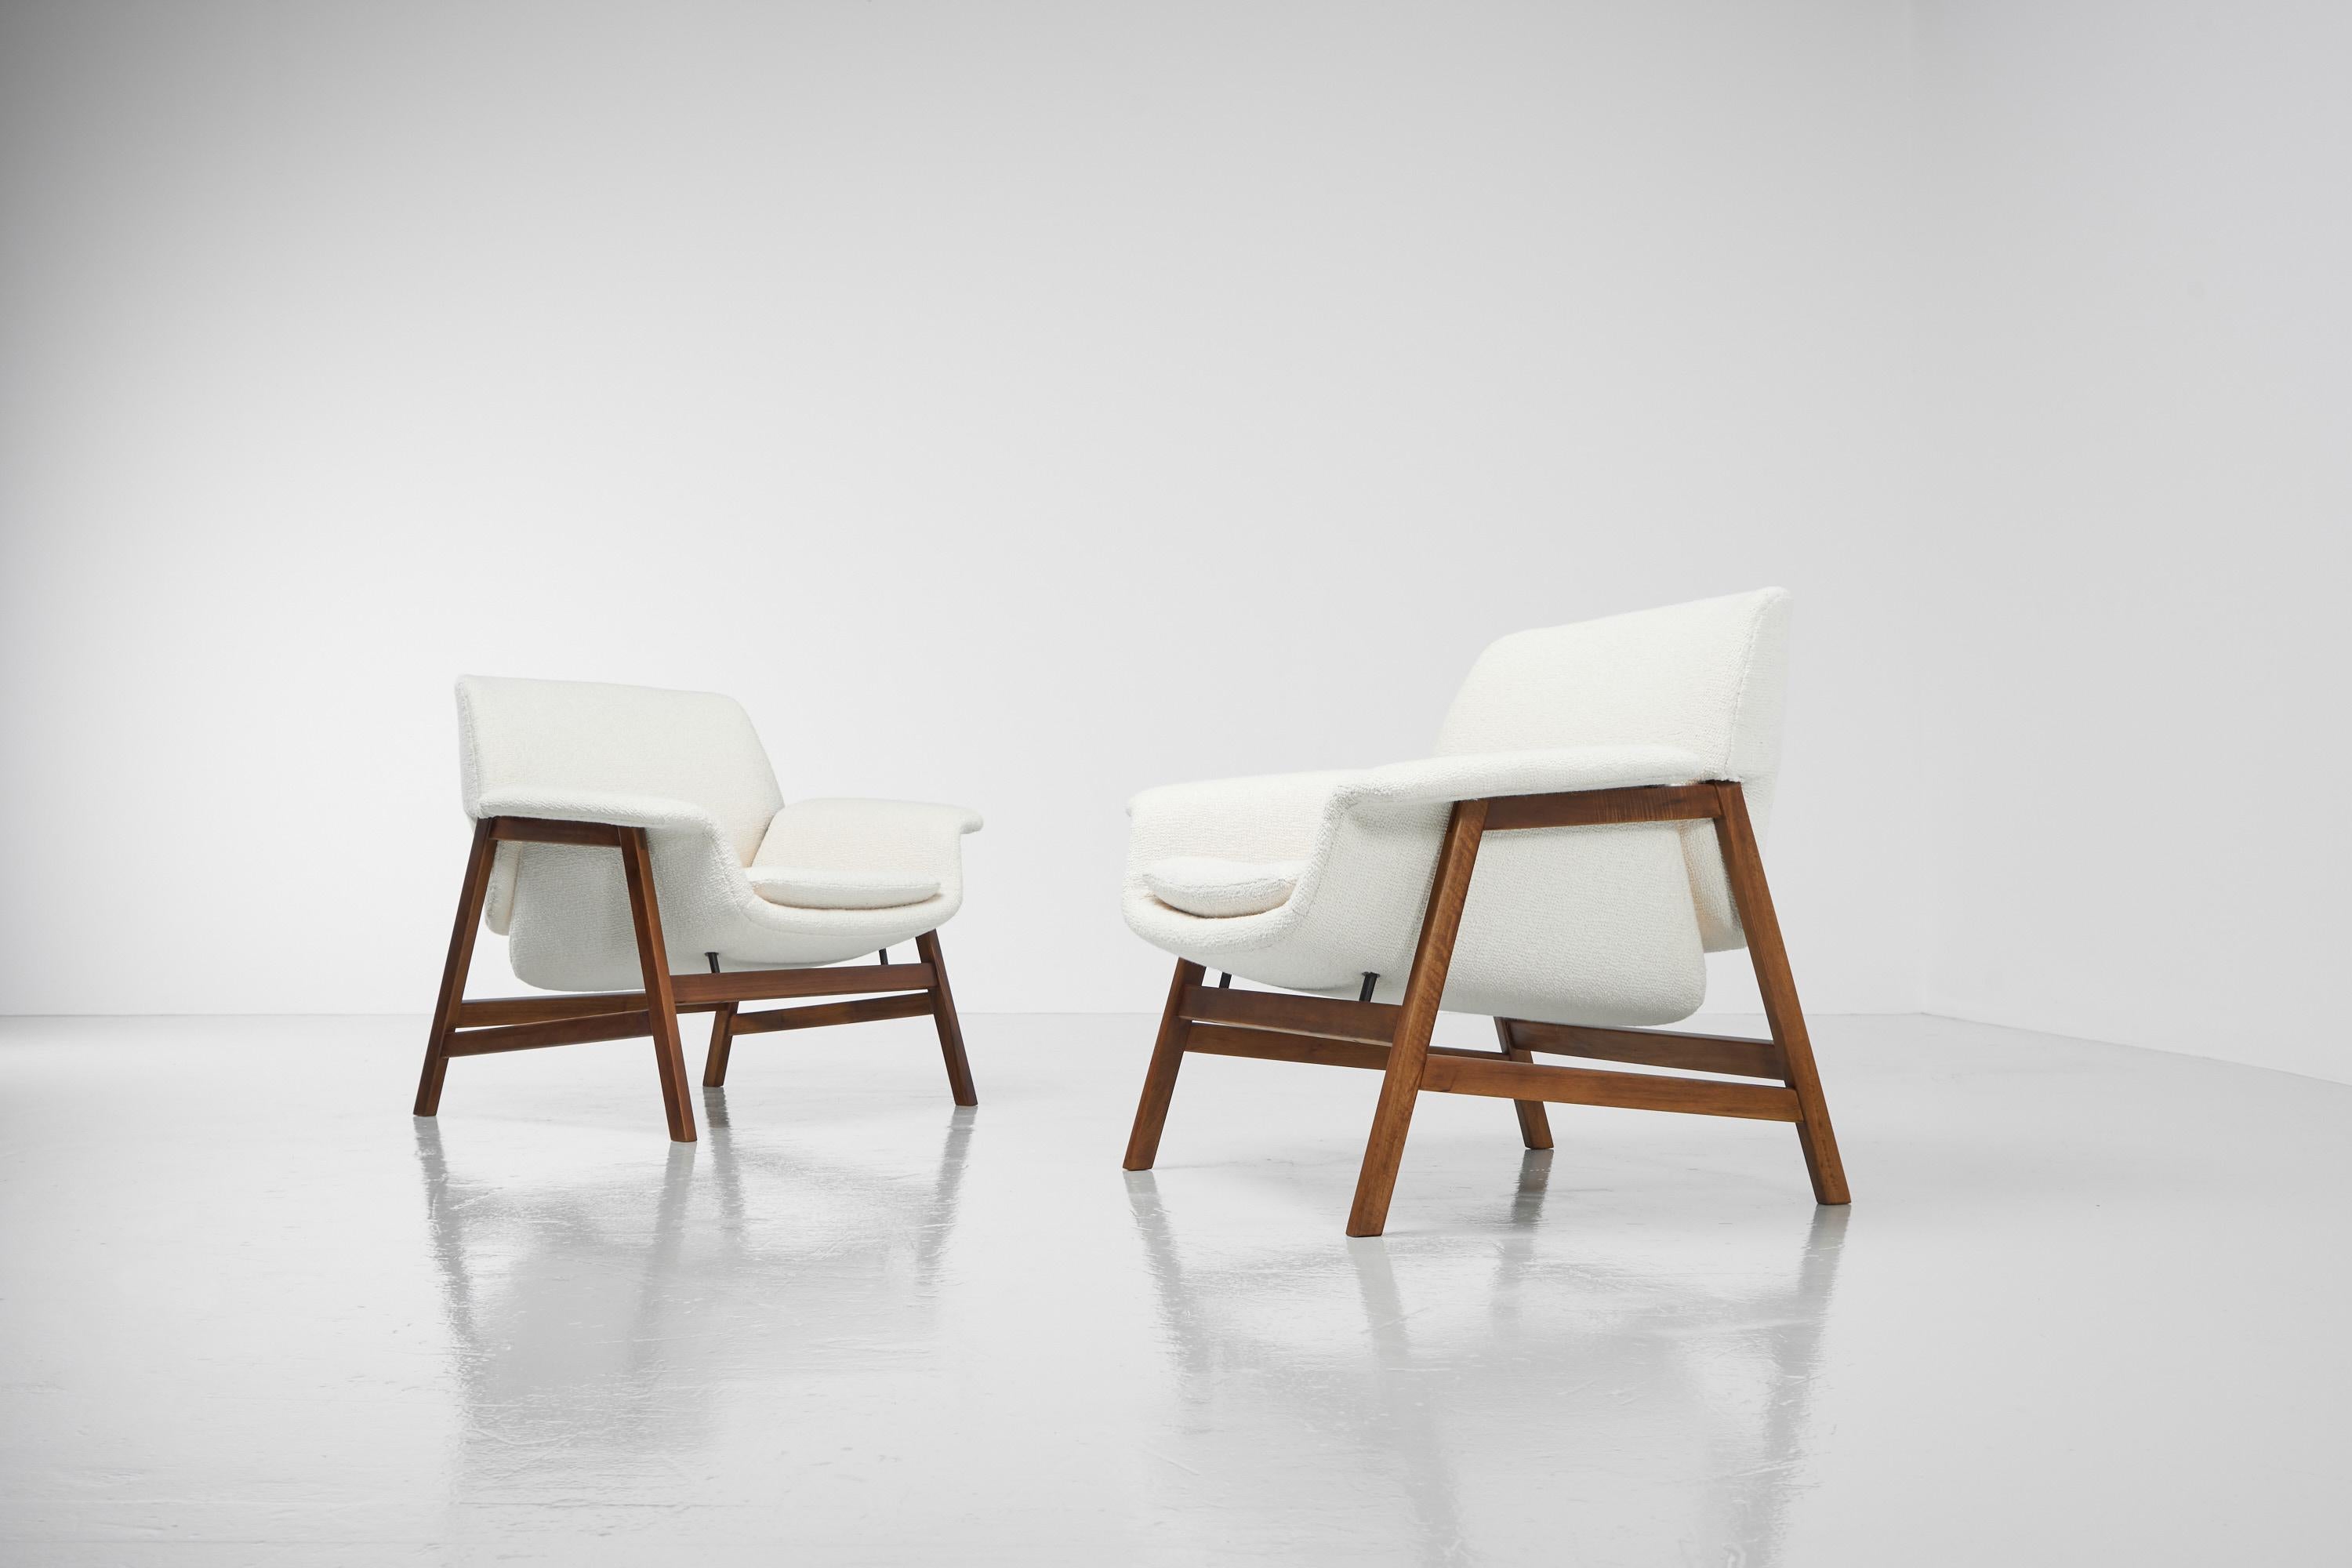 Stunning model 849 lounge chairs designed by Gianfranco Frattini and manufactured by Cassina, Italy 1956. These amazing chairs have a solid walnut wooden frame which is very straight forward. The beauty in these chairs is the contrast between the